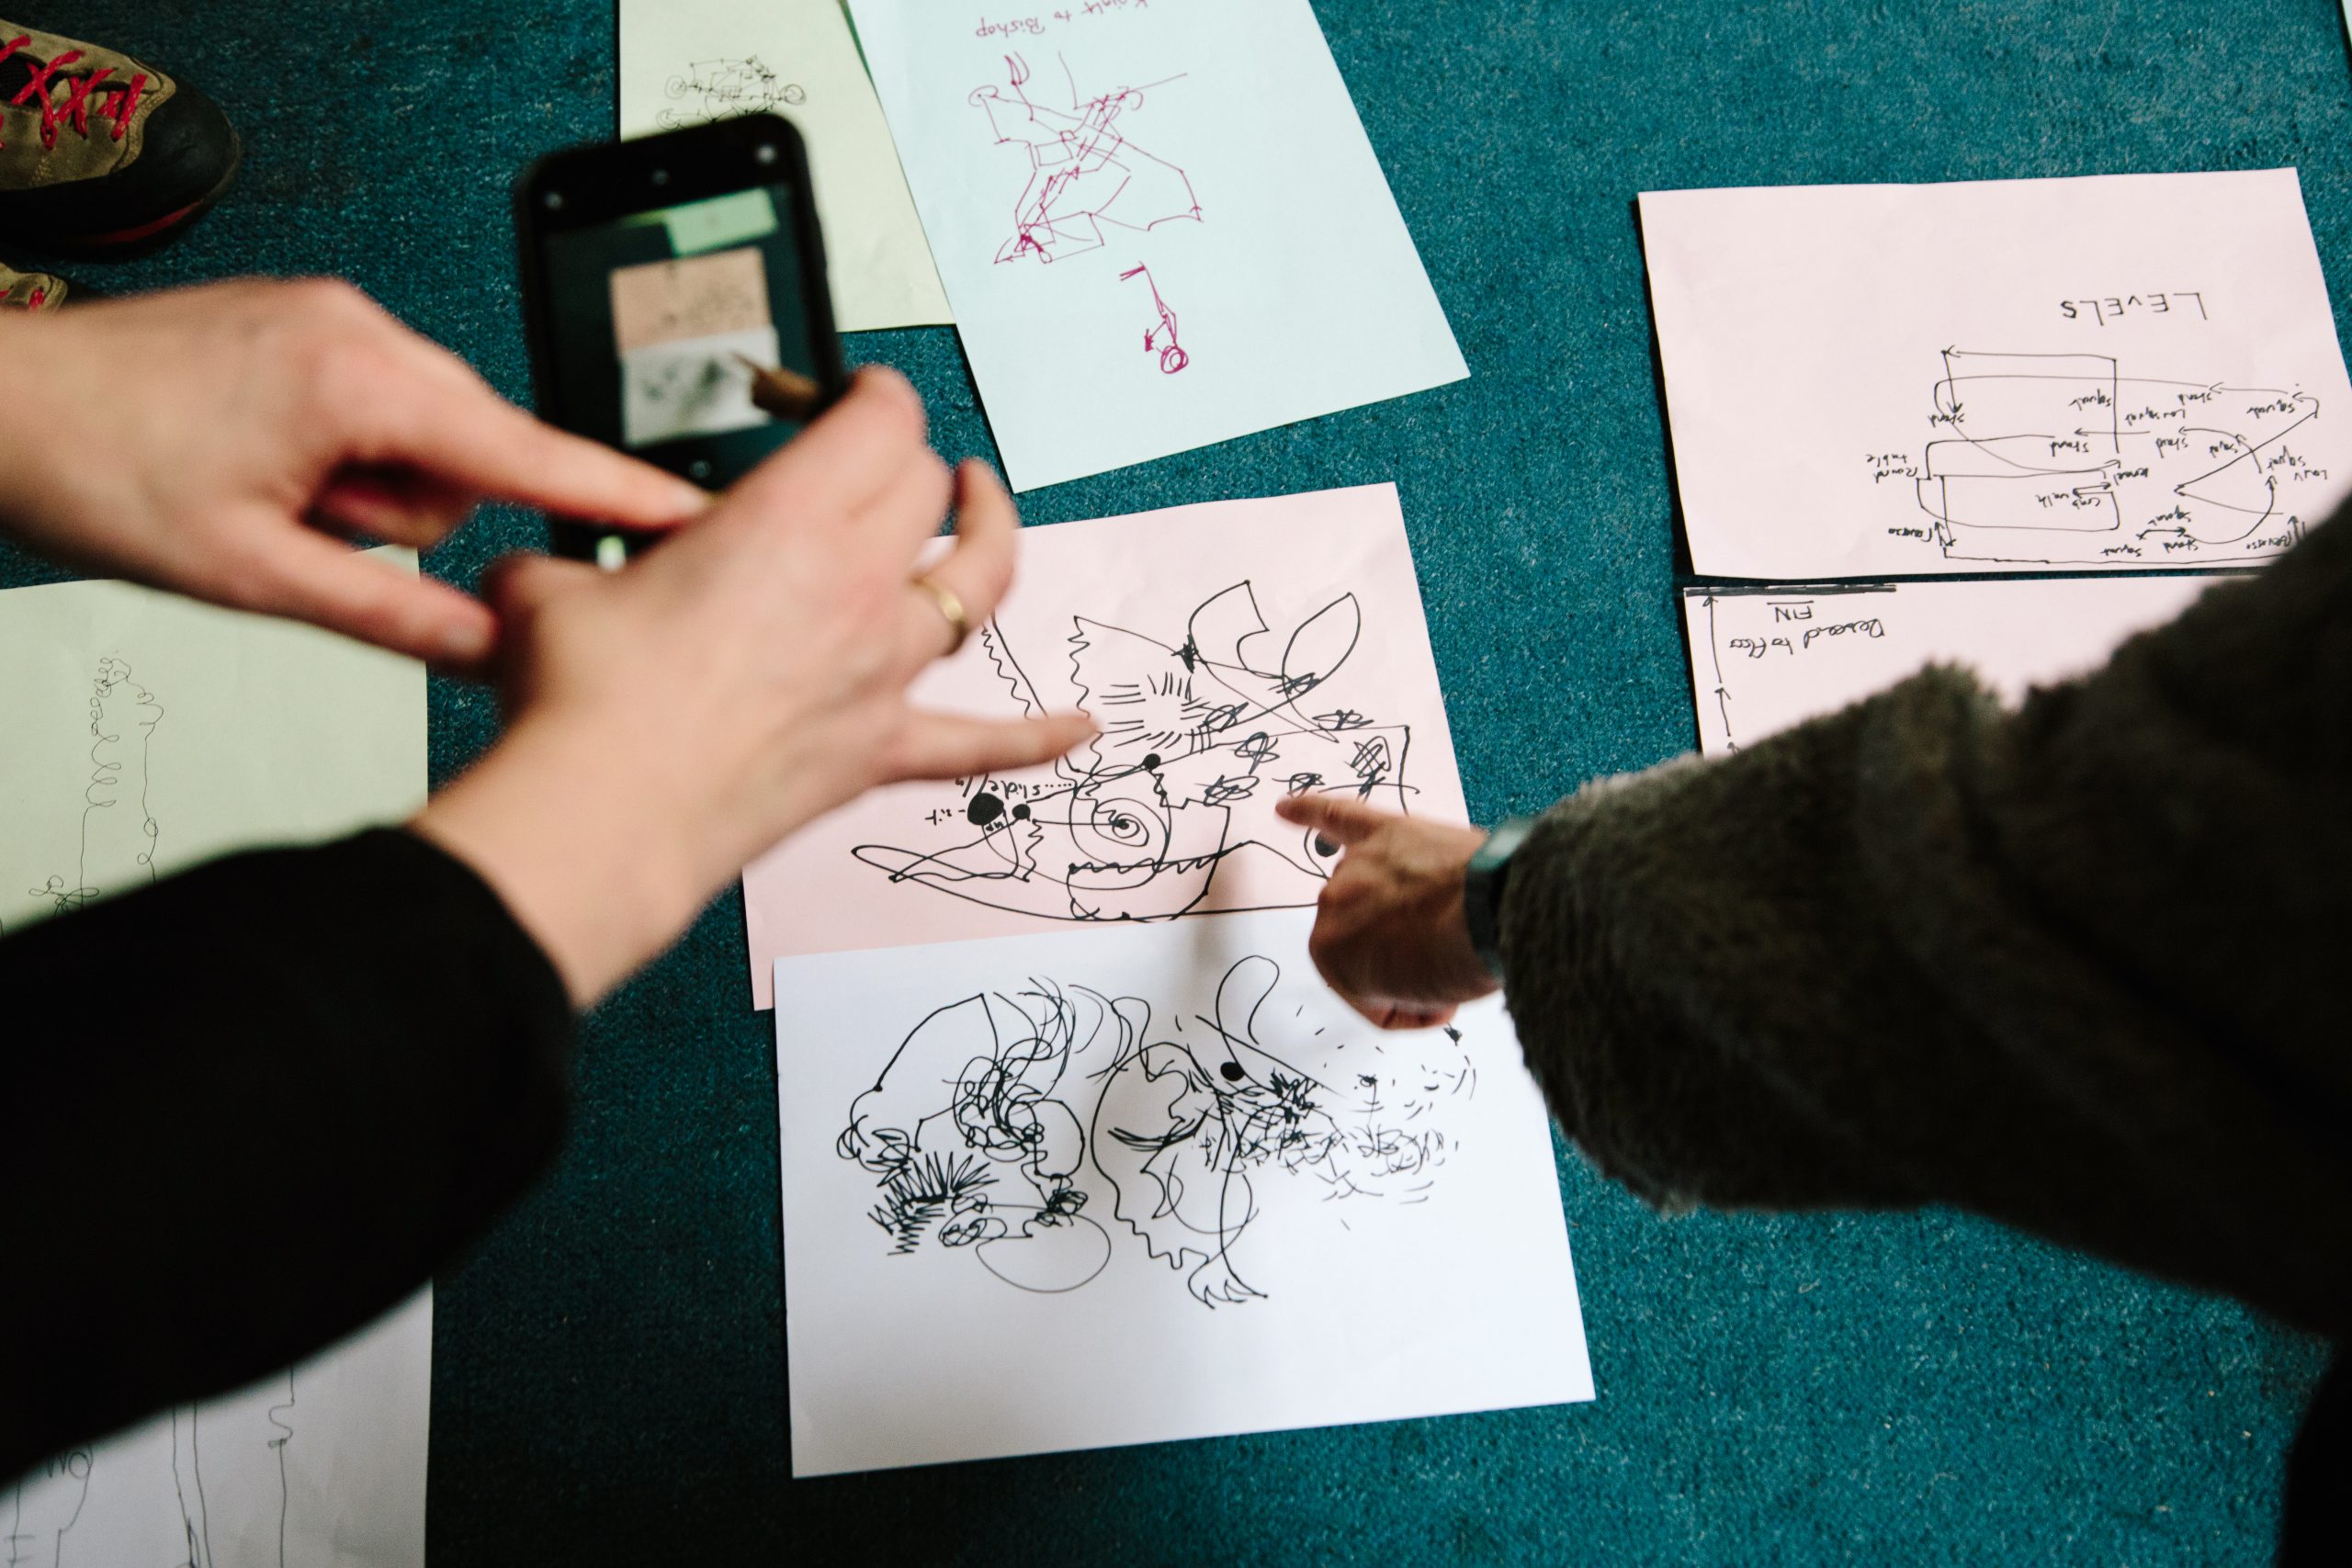 Close-up of hands pointing at and photographing abstract line drawings and diagrams on paper spread out on the floor.